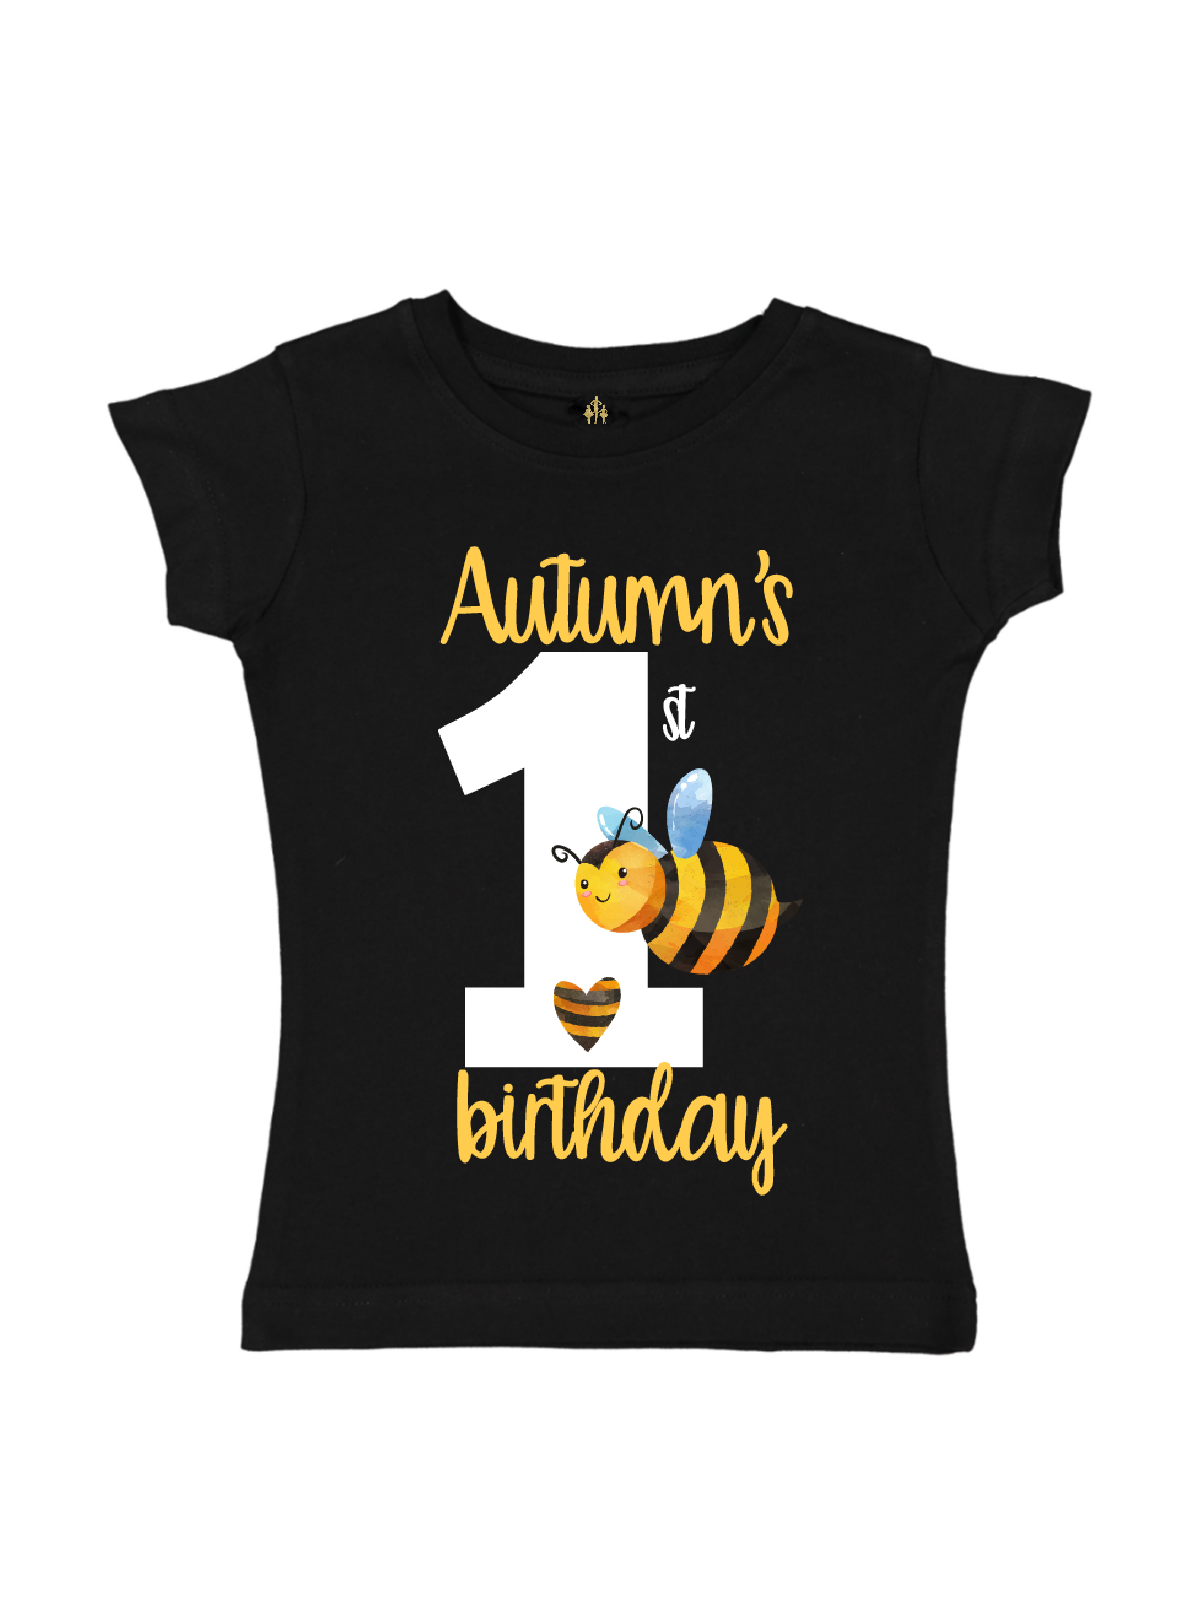 personalized bumble bee birthday shirts